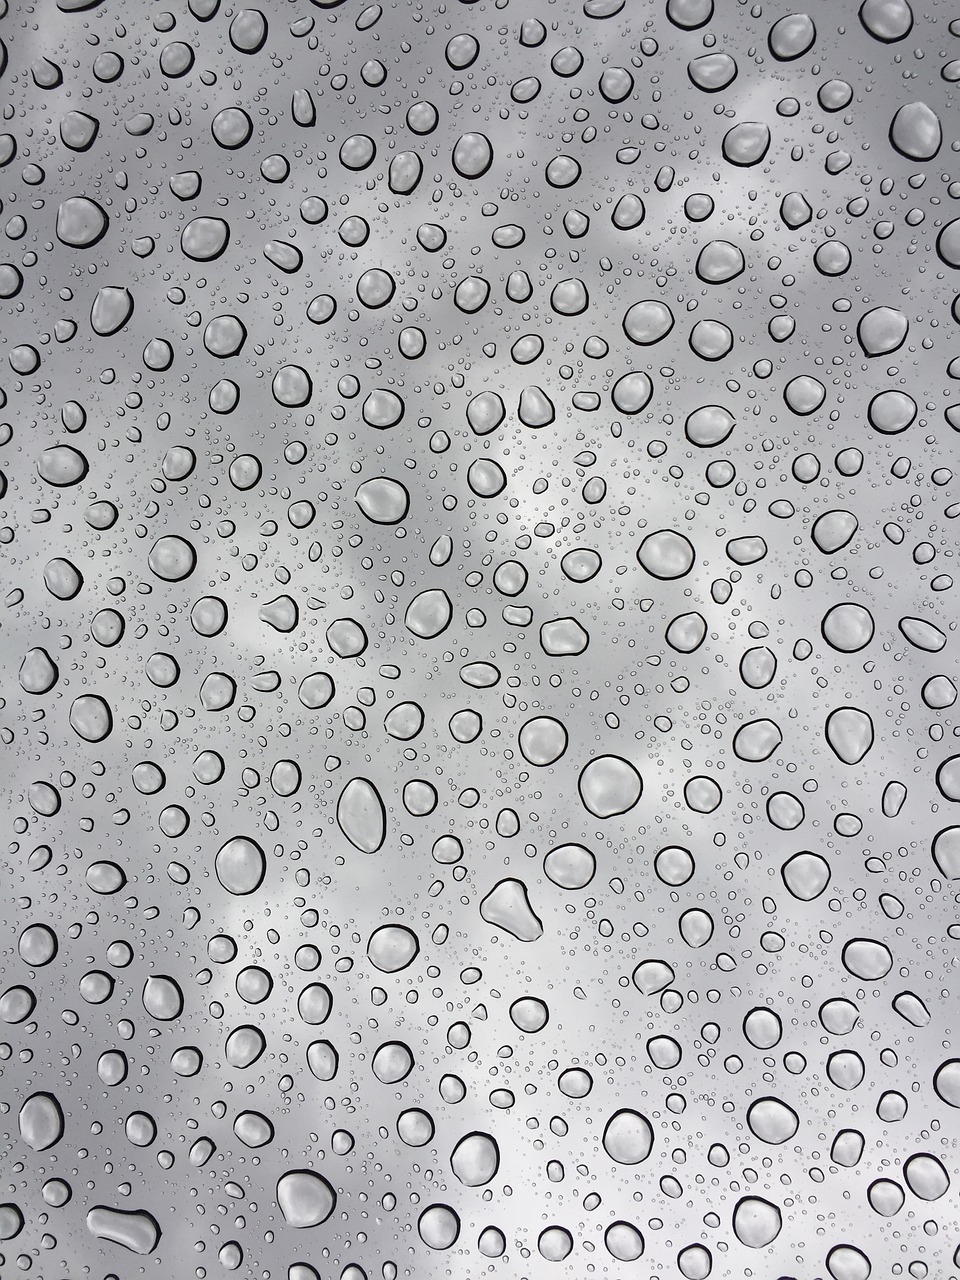 water droplets drop free photo